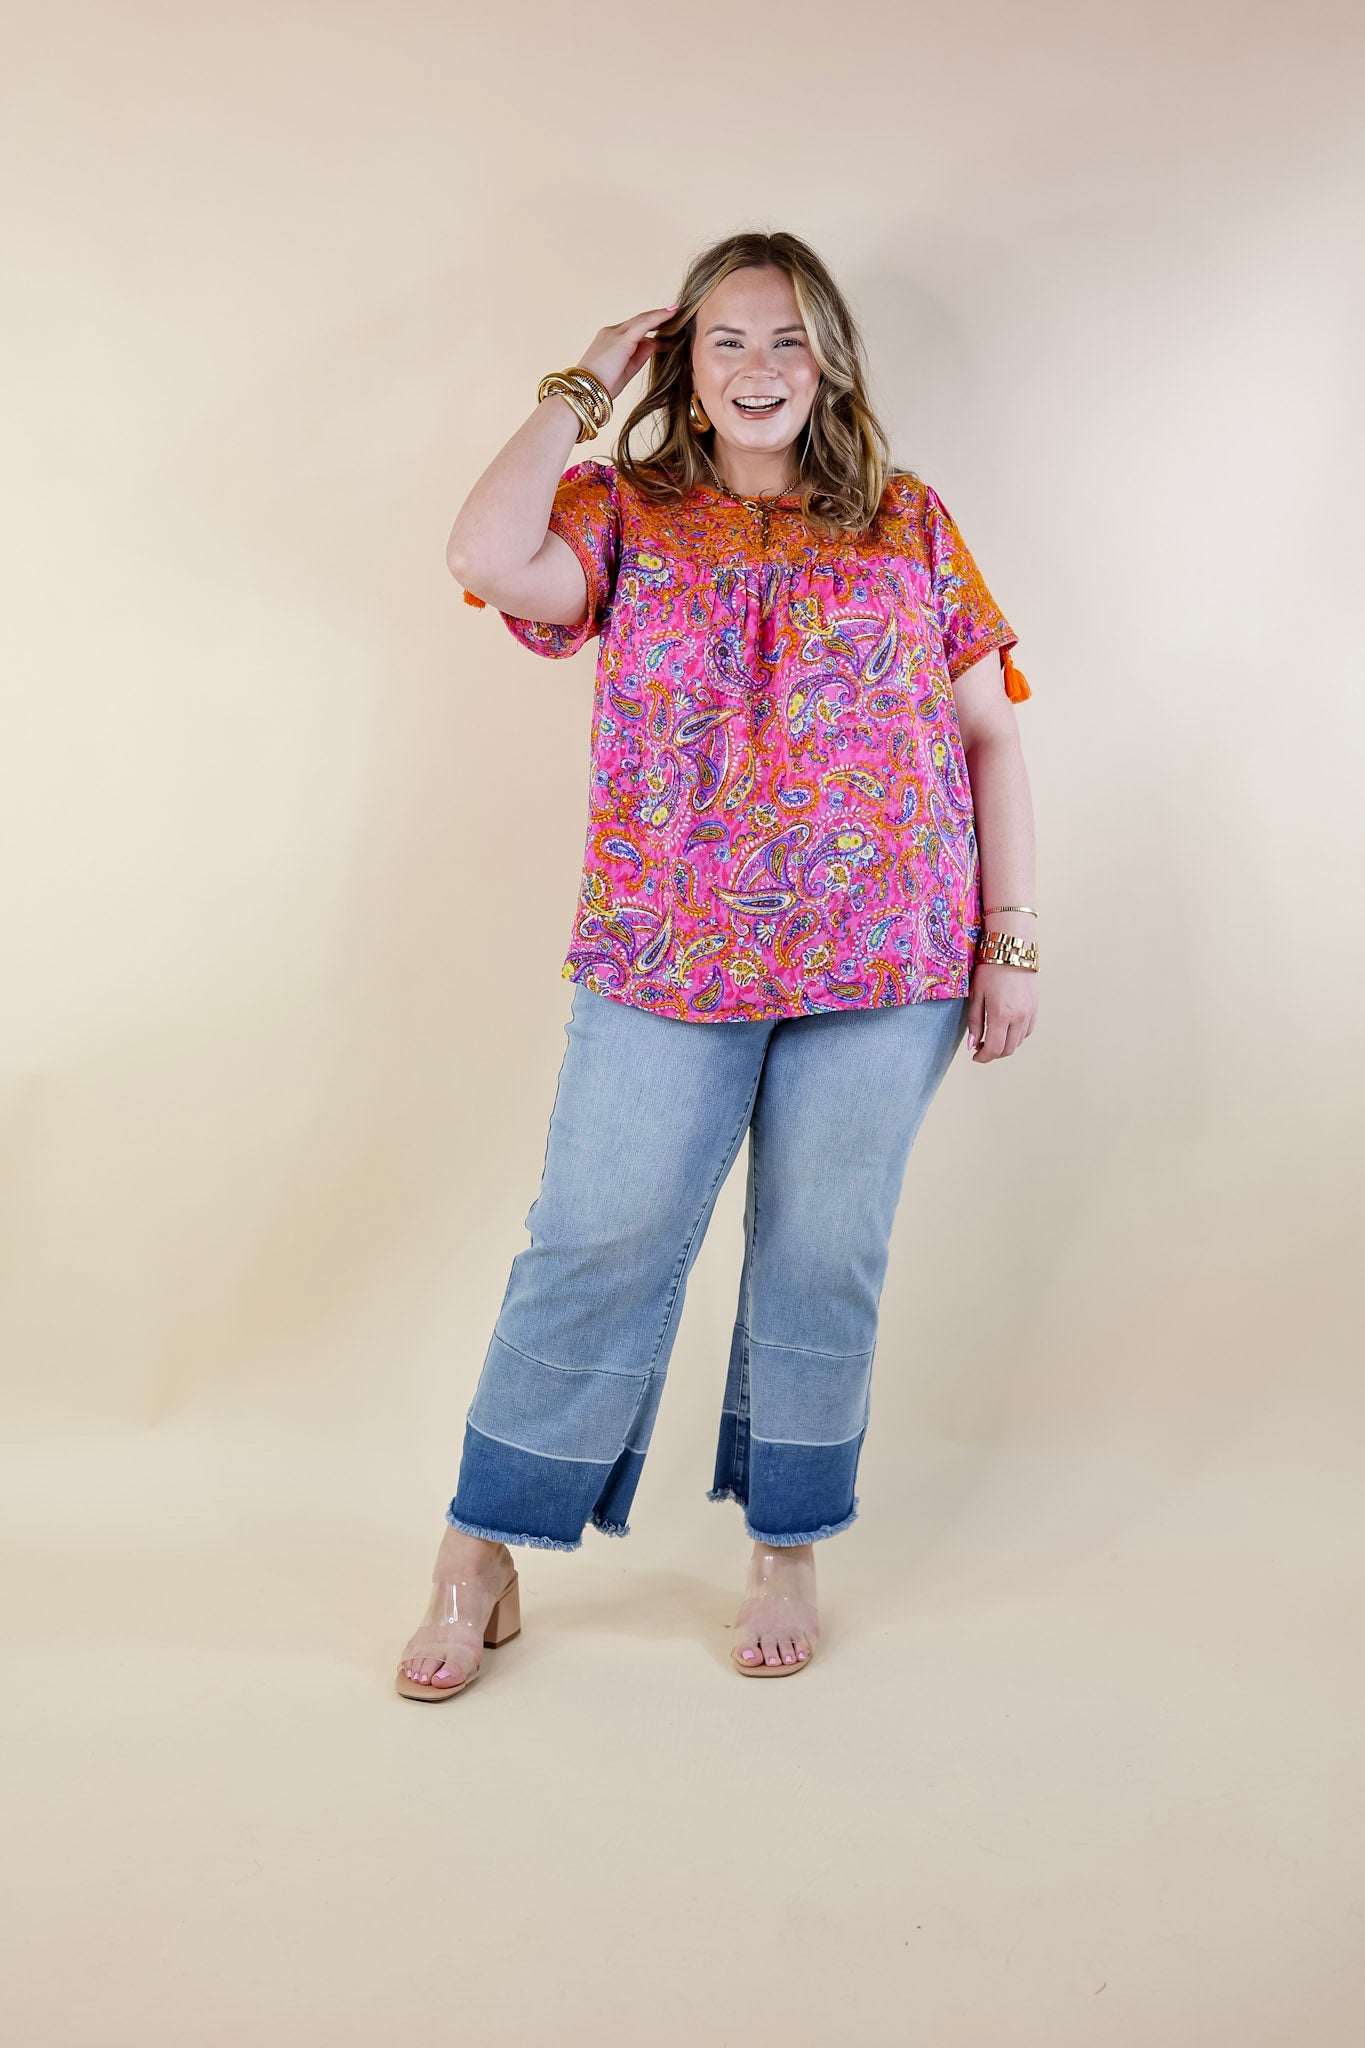 Sweet And Charming Paisley Print Top with Orange Floral Embroidery in Pink - Giddy Up Glamour Boutique